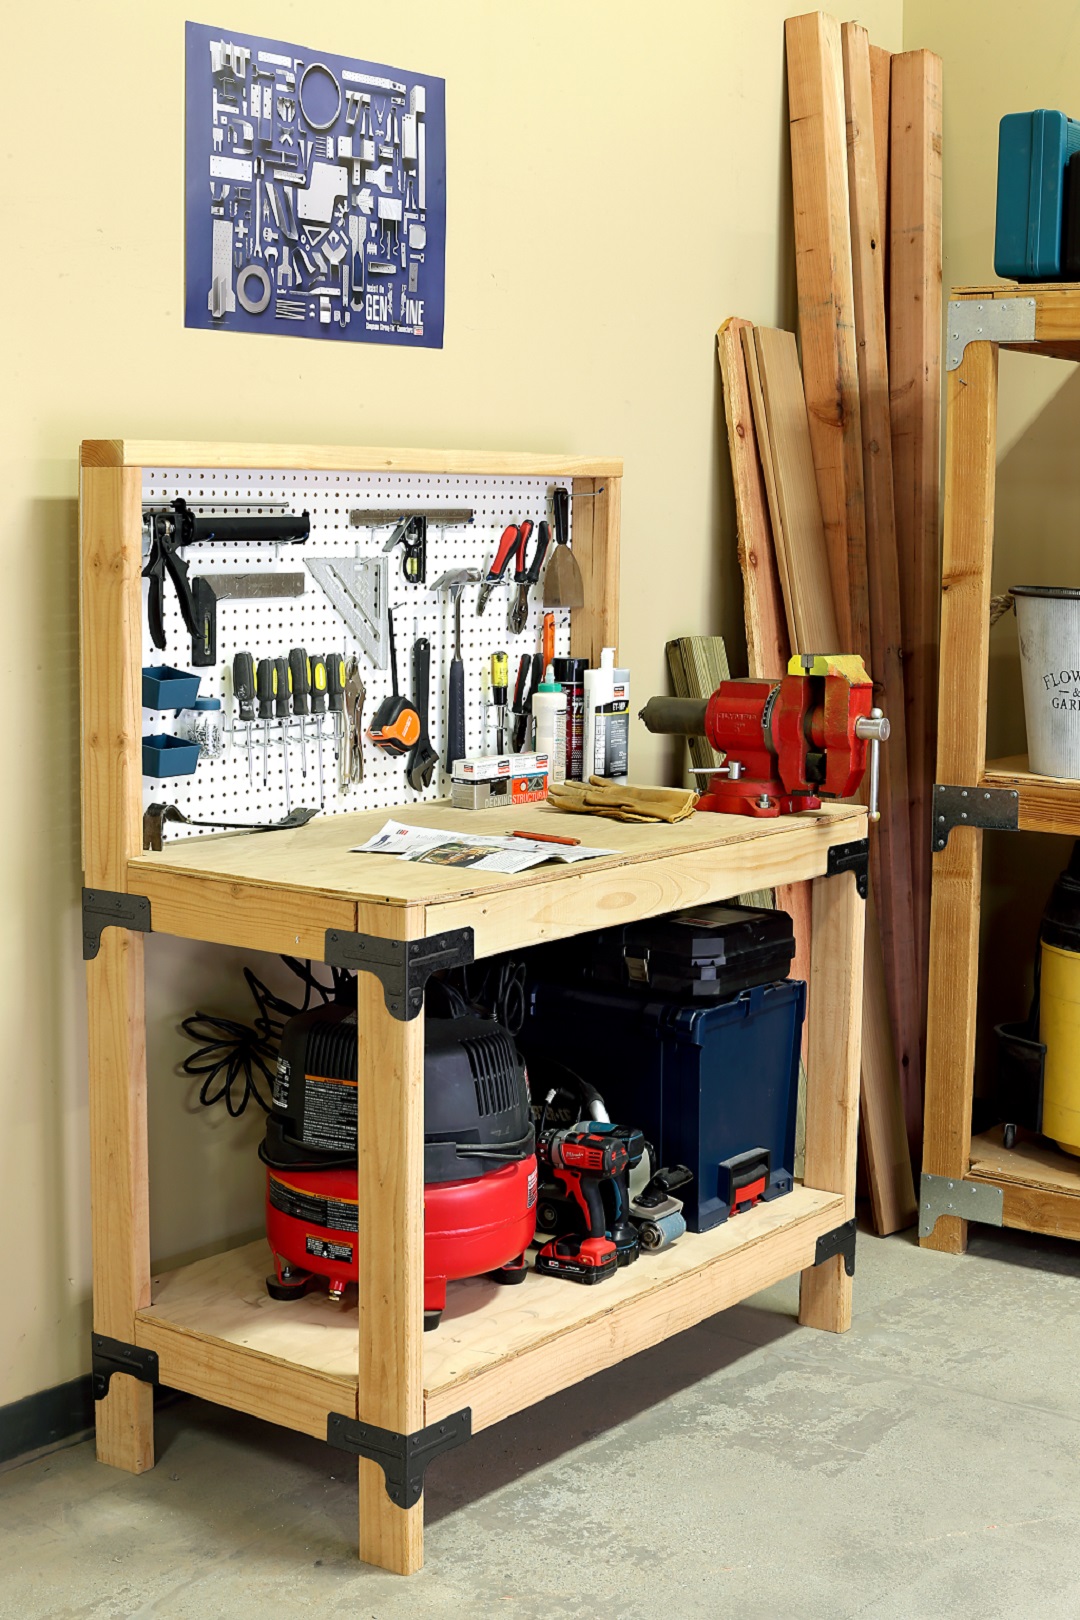 Learn About Our Workbench Shelving Kit, Simpson Strong Tie Wbsk Workbench And Shelving Hardware Kit